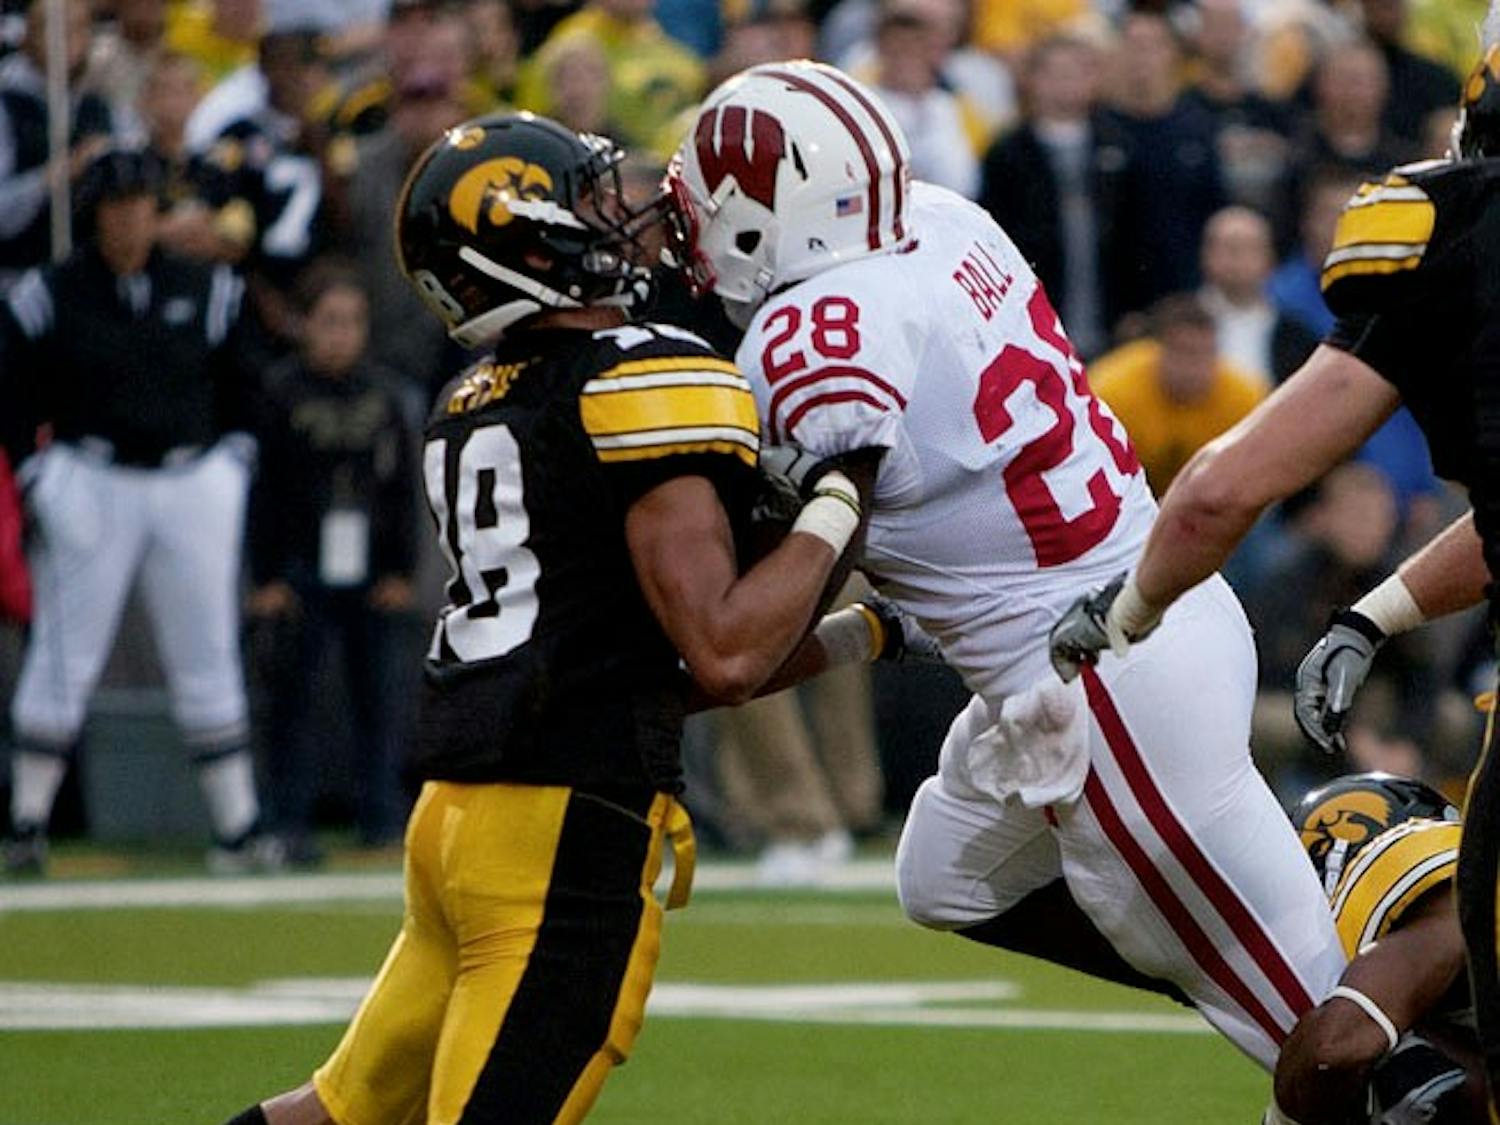 Badgers overcome injuries, late deficit to beat Hawkeyes